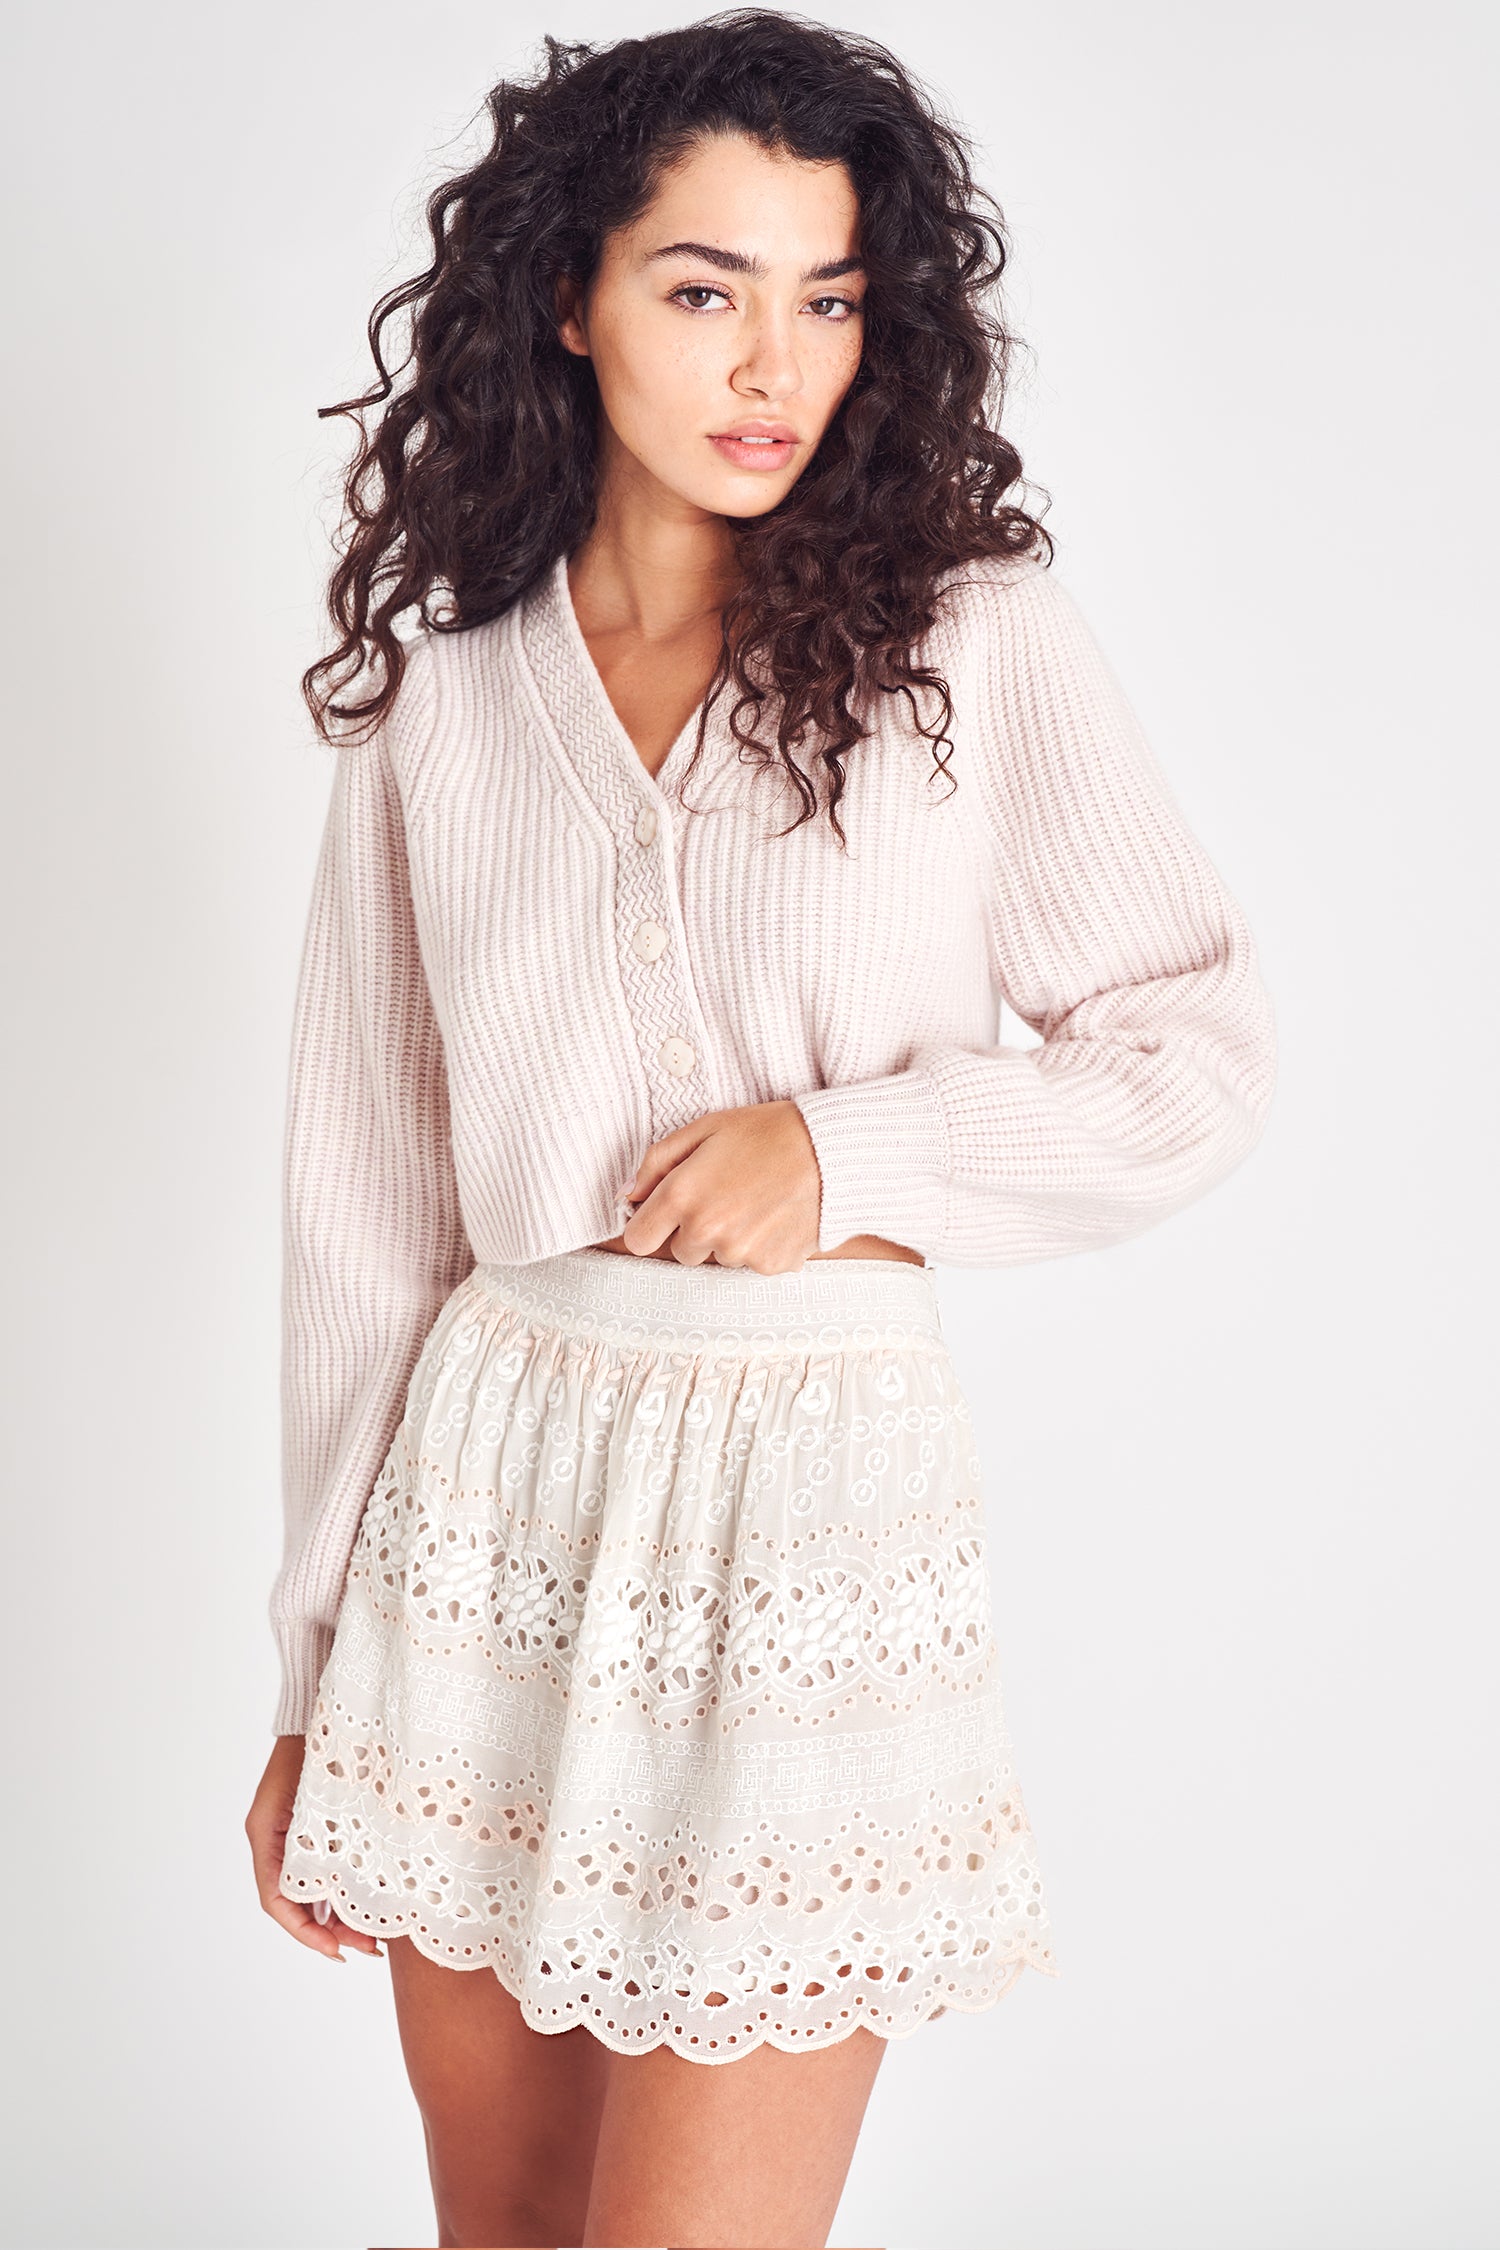 Cream mini skirt with eyelet and embroidery detailing, featuring an A-line hem.